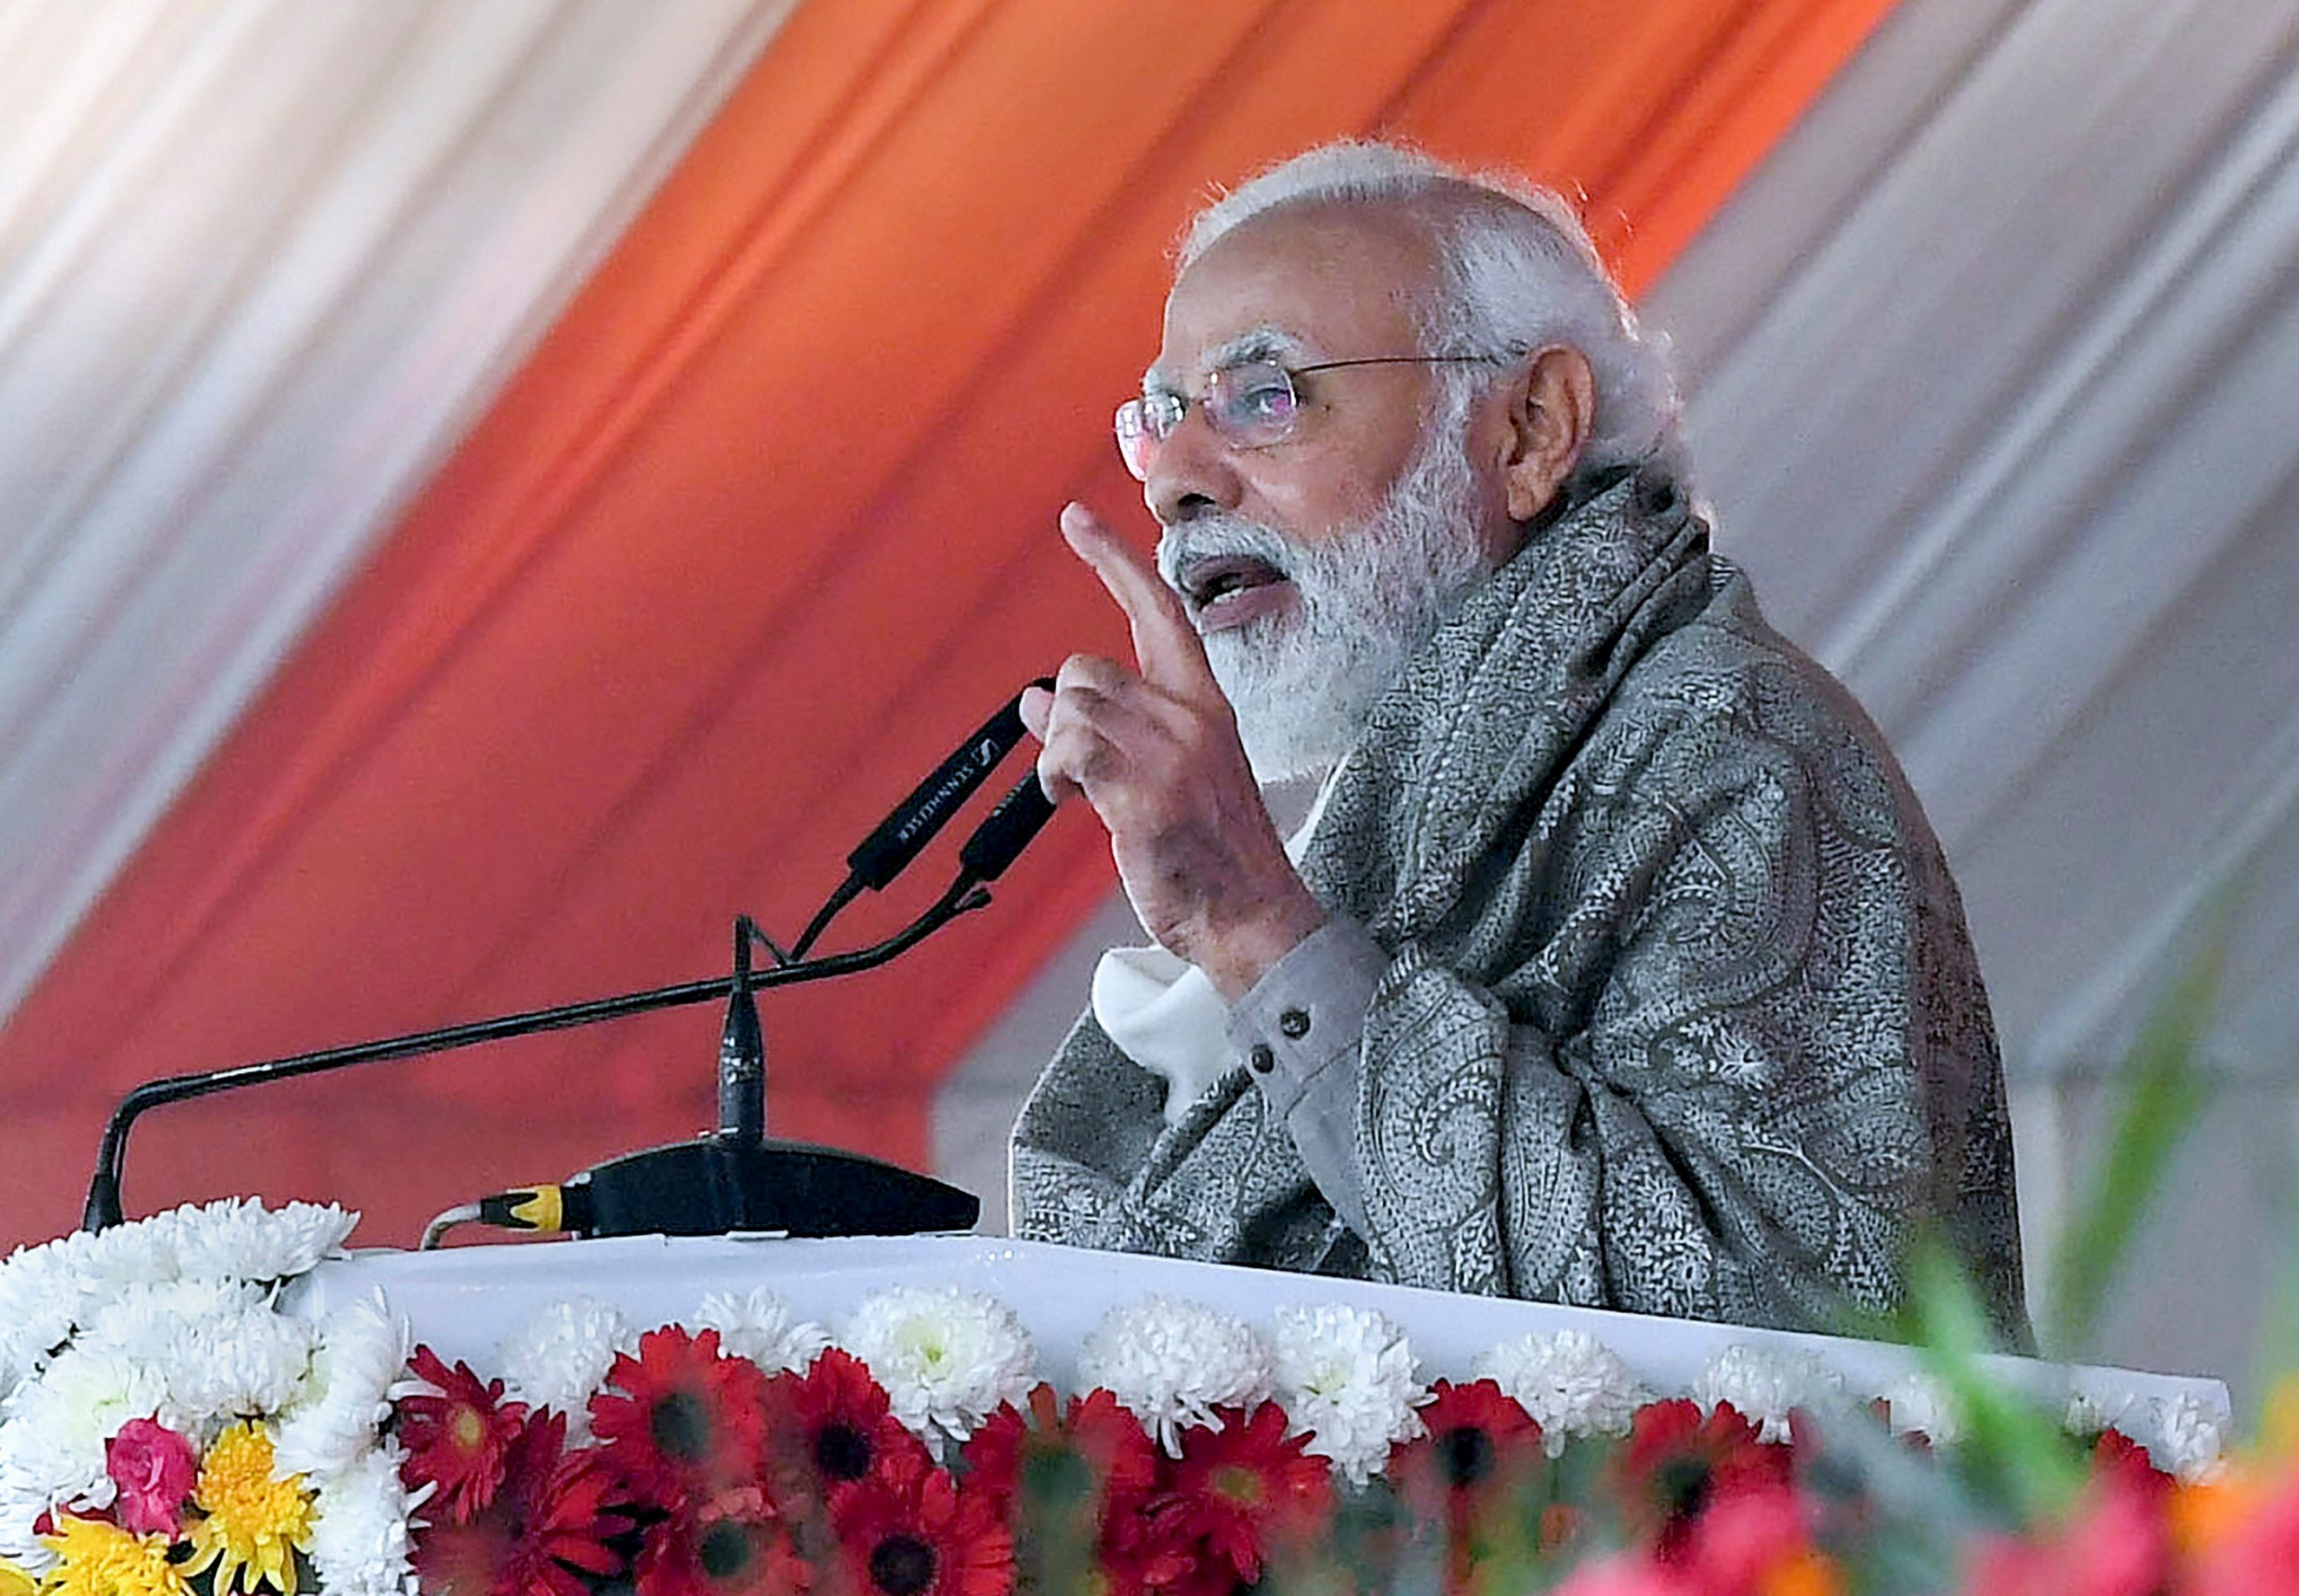 COVID poses challenges, but cannot stall India’s growth, says PM Modi